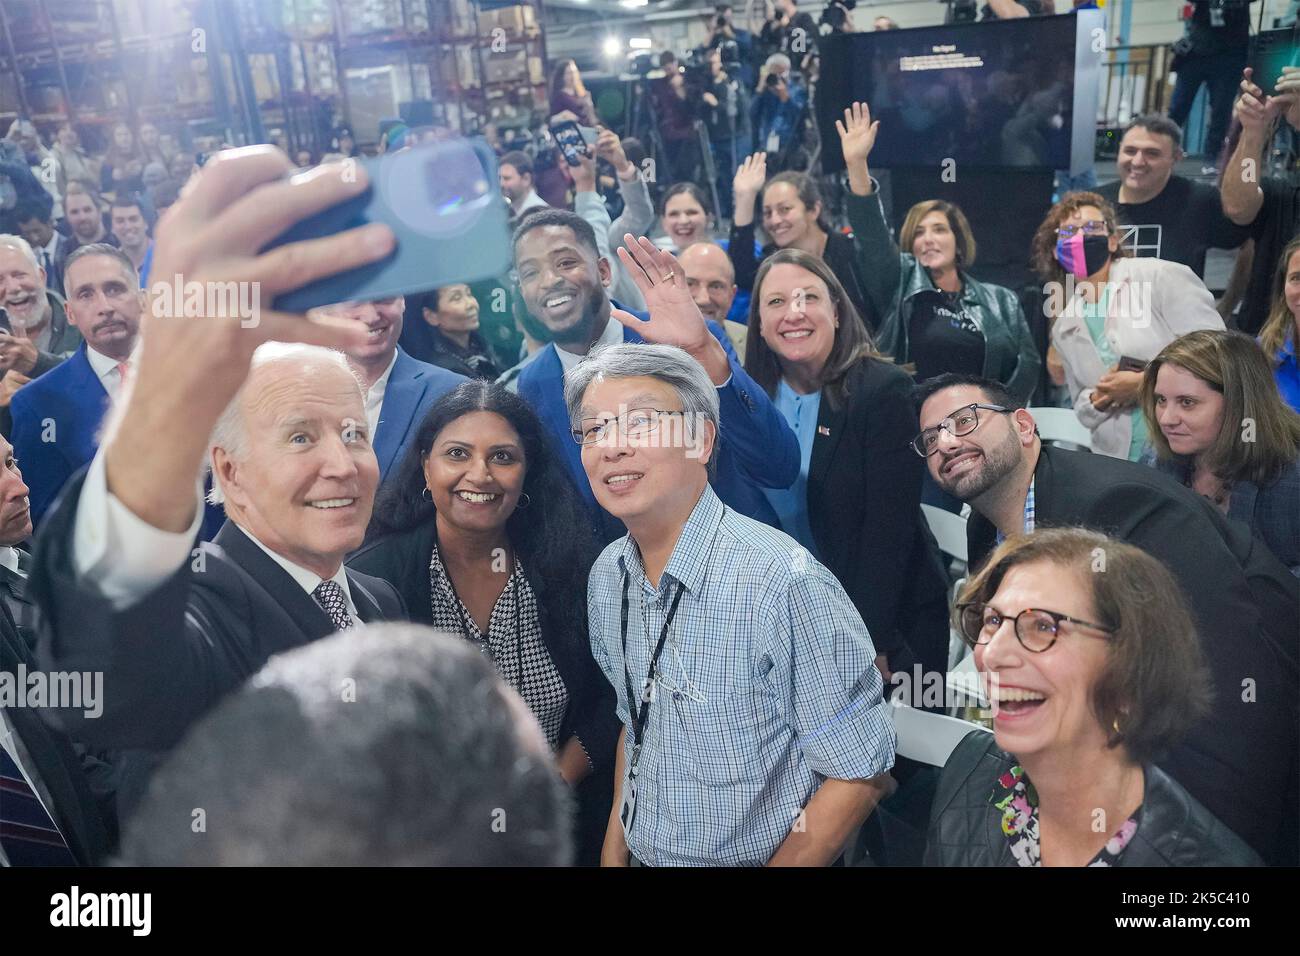 Poughkeepsie, United States. 06th Oct, 2022. U.S. President Joe Biden, takes a selfie with employees during a visit to an IBM facility, October 6, 2022, in Poughkeepsie, New York. Biden championed his CHIPs Act that boosts U.S. semiconductor chip manufacturing as IBM announced plans to invest $20 billion dollars in expanding in the Hudson Valley. Credit: Adam Schultz/White House Photo/Alamy Live News Stock Photo